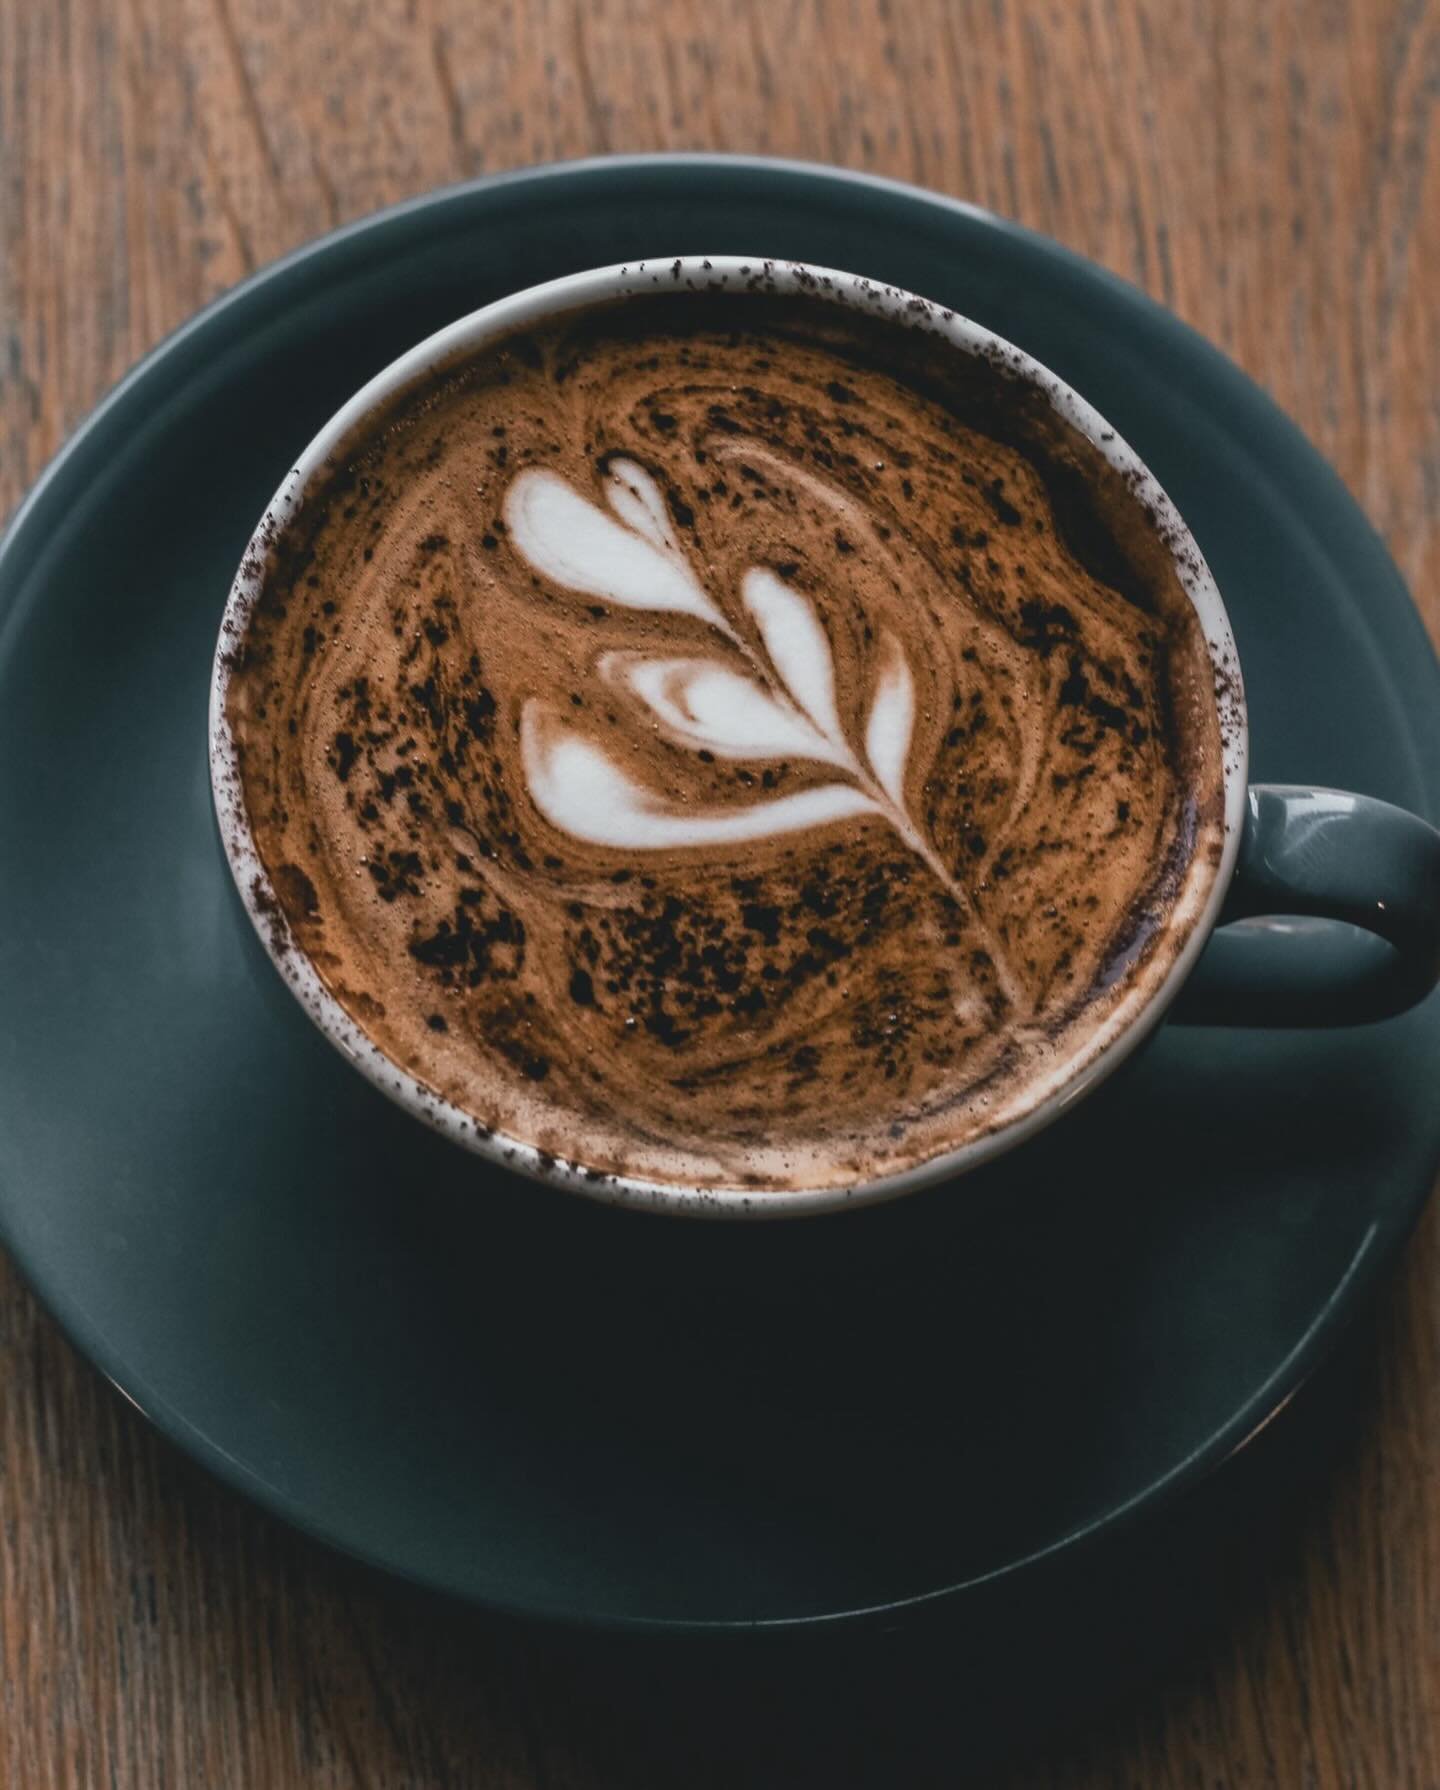 Meeting a friend in town for a catch up and great coffee? Hamlet is the perfect place, open seven days a week. 

Ask for our loyalty card, where the tenth hot drink is free!